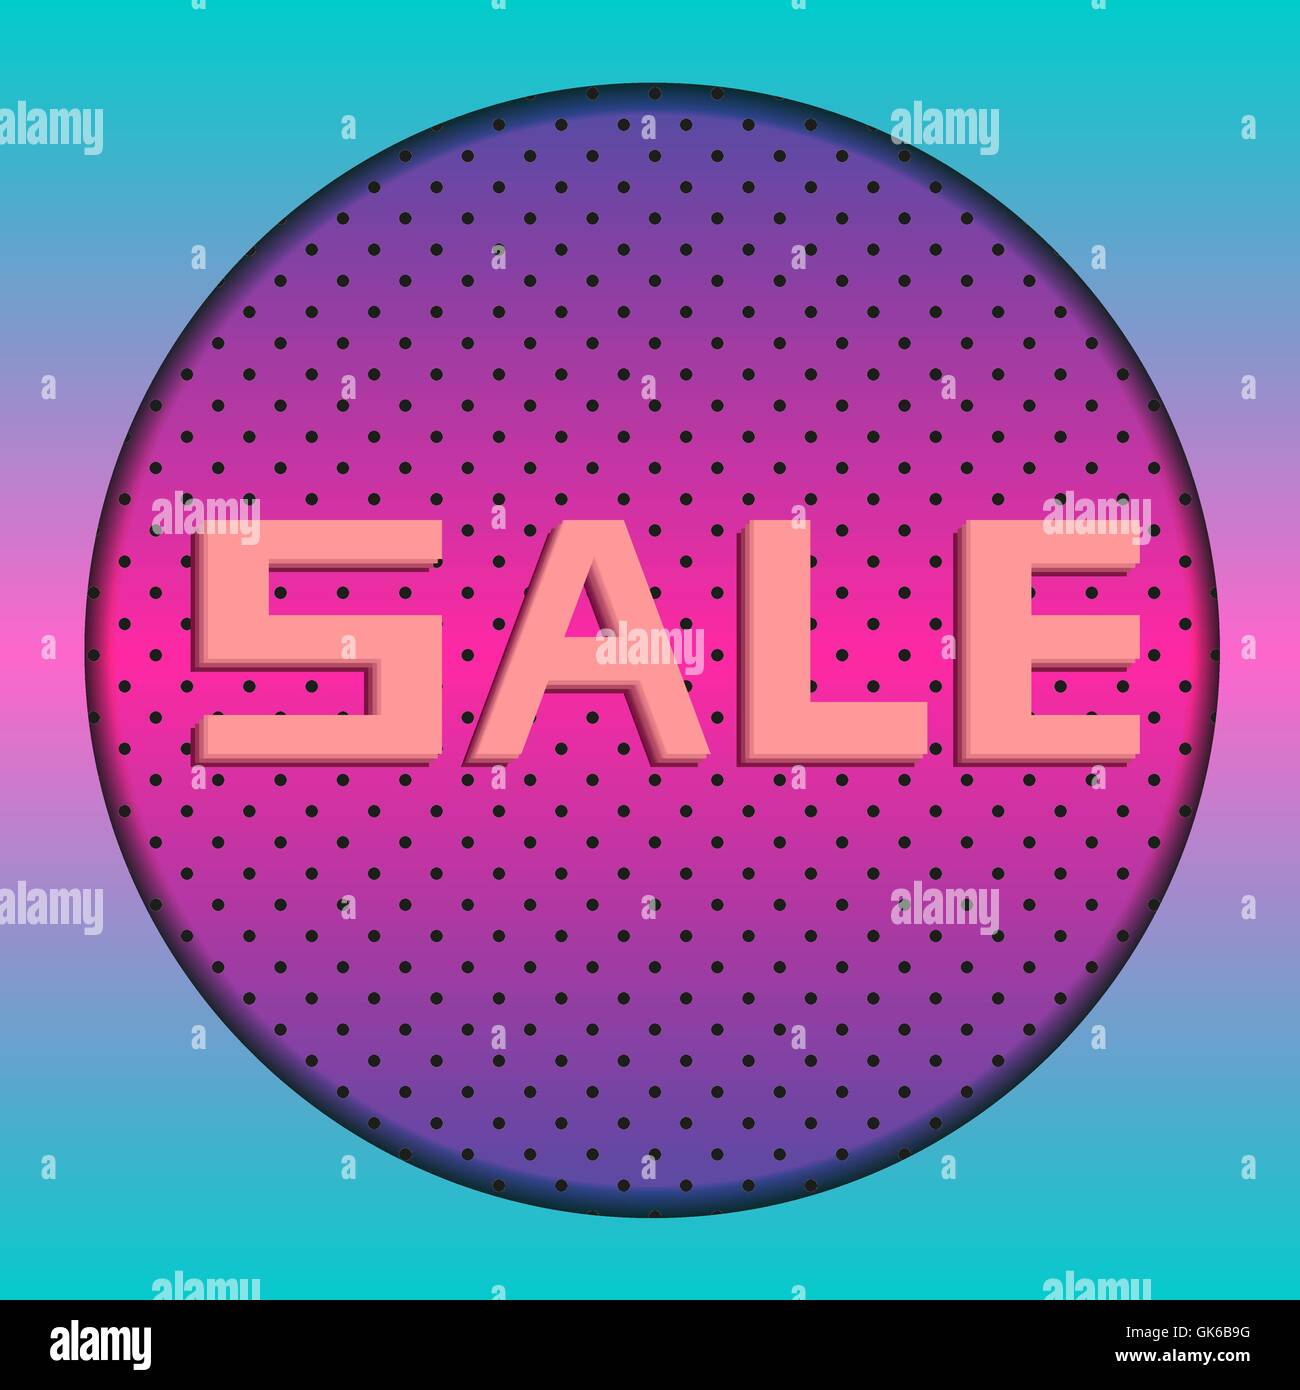 Colorful banner for discounts and advertising sales Stock Vector